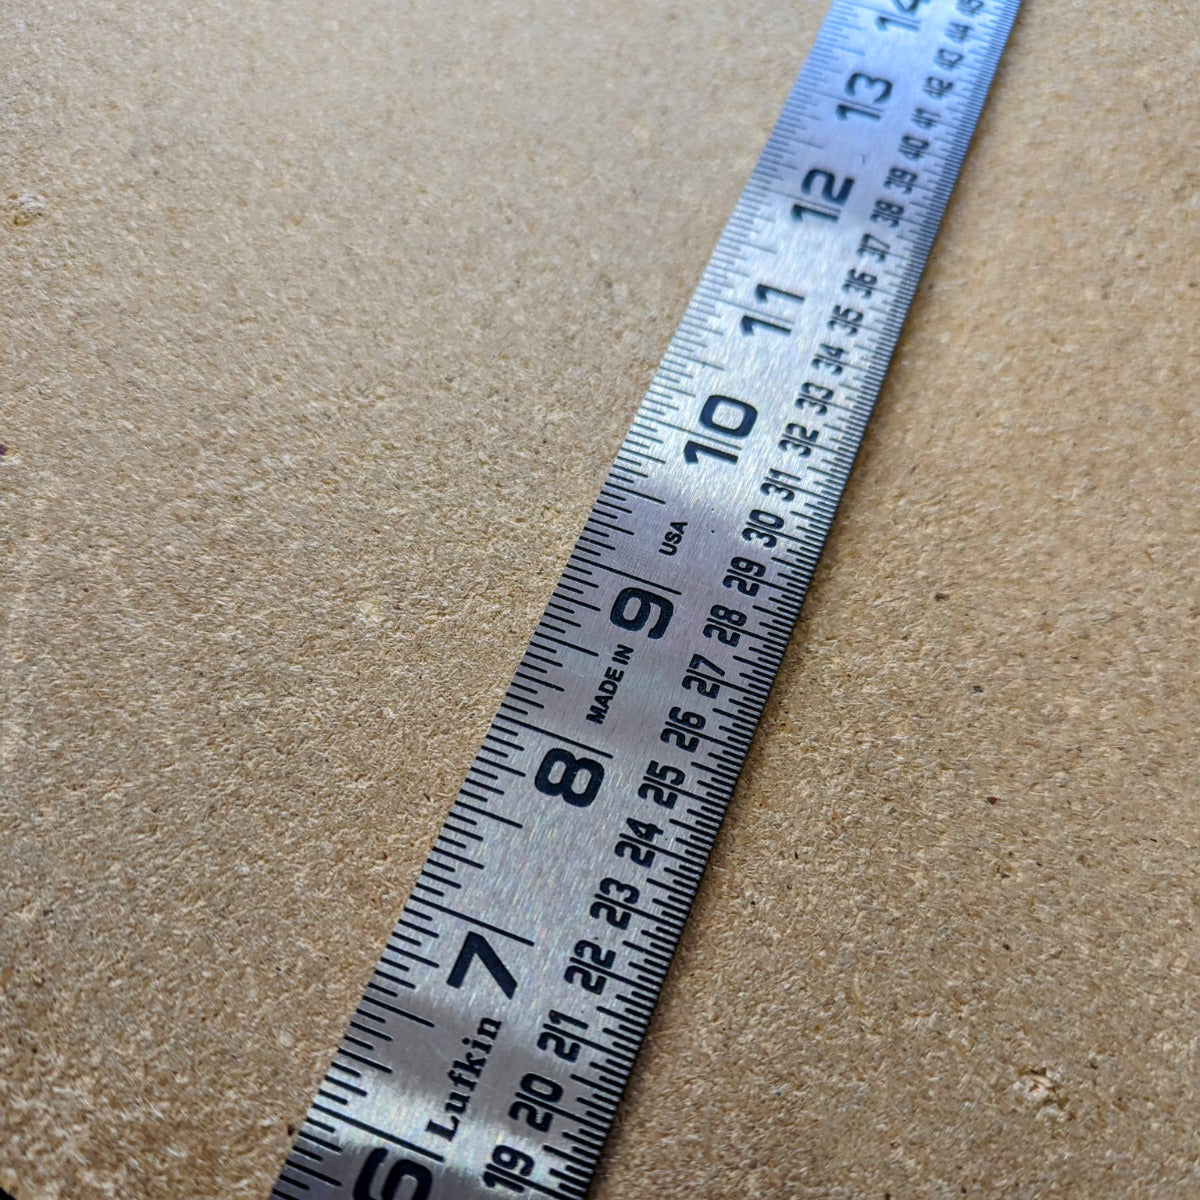 NOS Lufkin US Made Steel Tinner's Circumference Rule 1/16" x 1 1/4" x 3' (953FT)